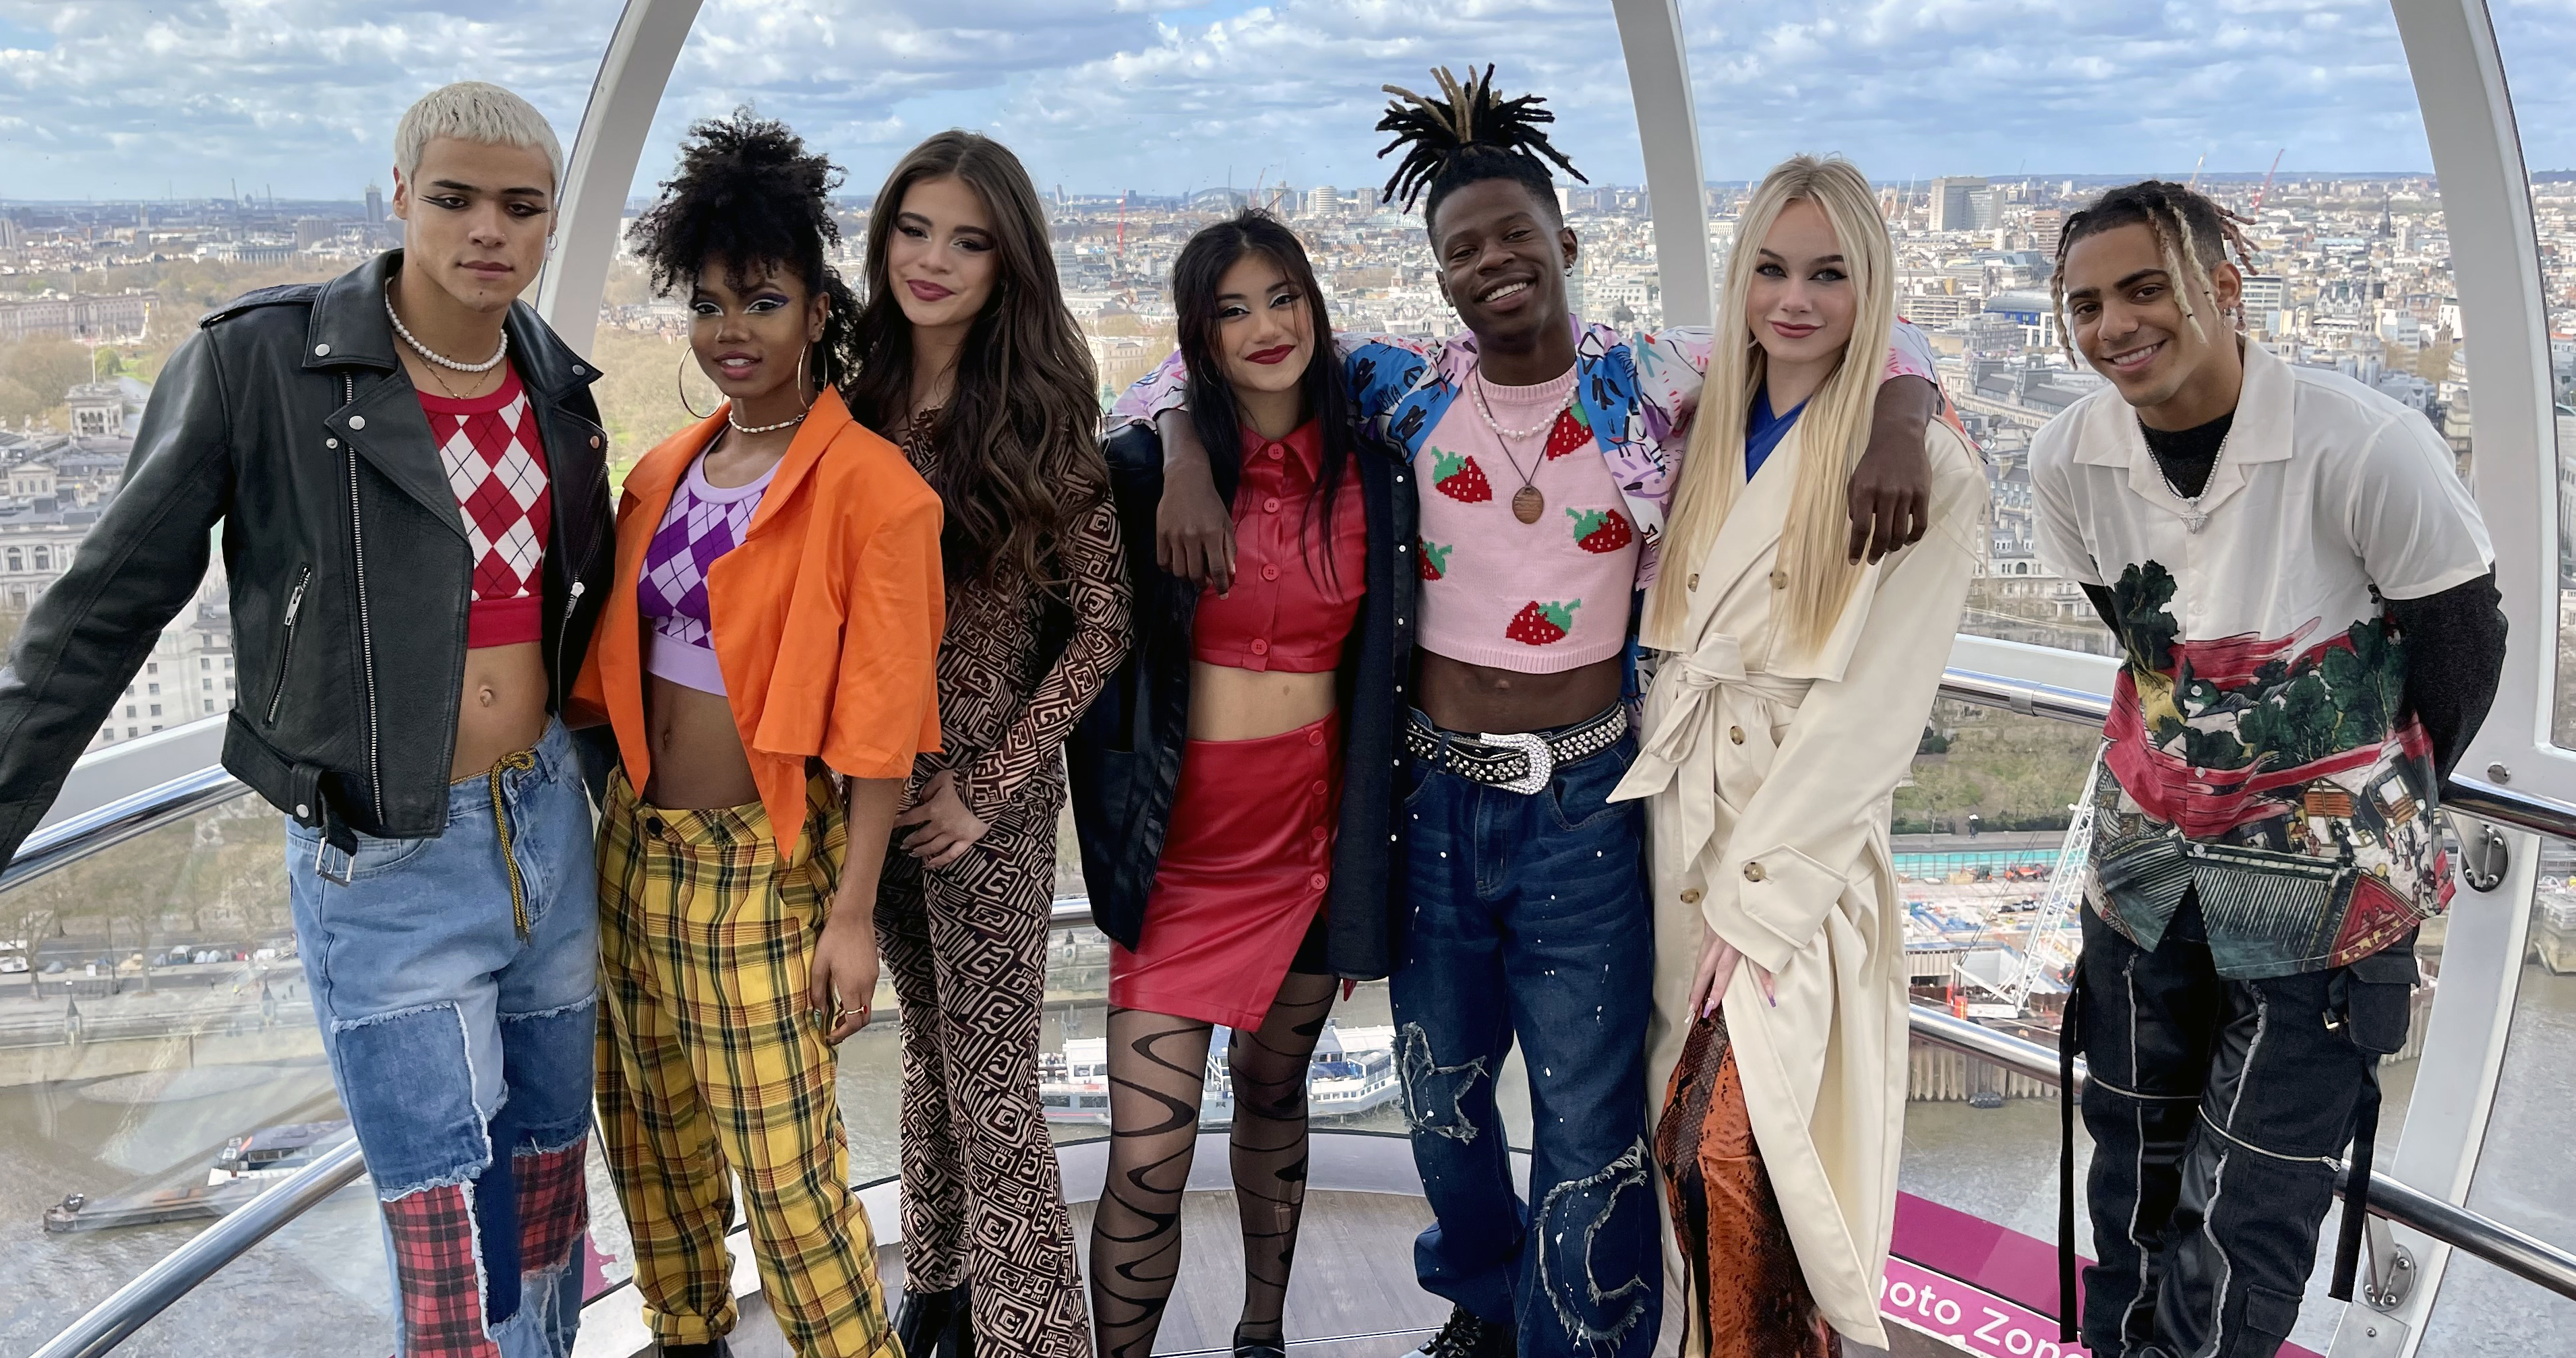 The Future X: Everything you need to know about former Spice Girls manager Simon Fuller's TikTok group